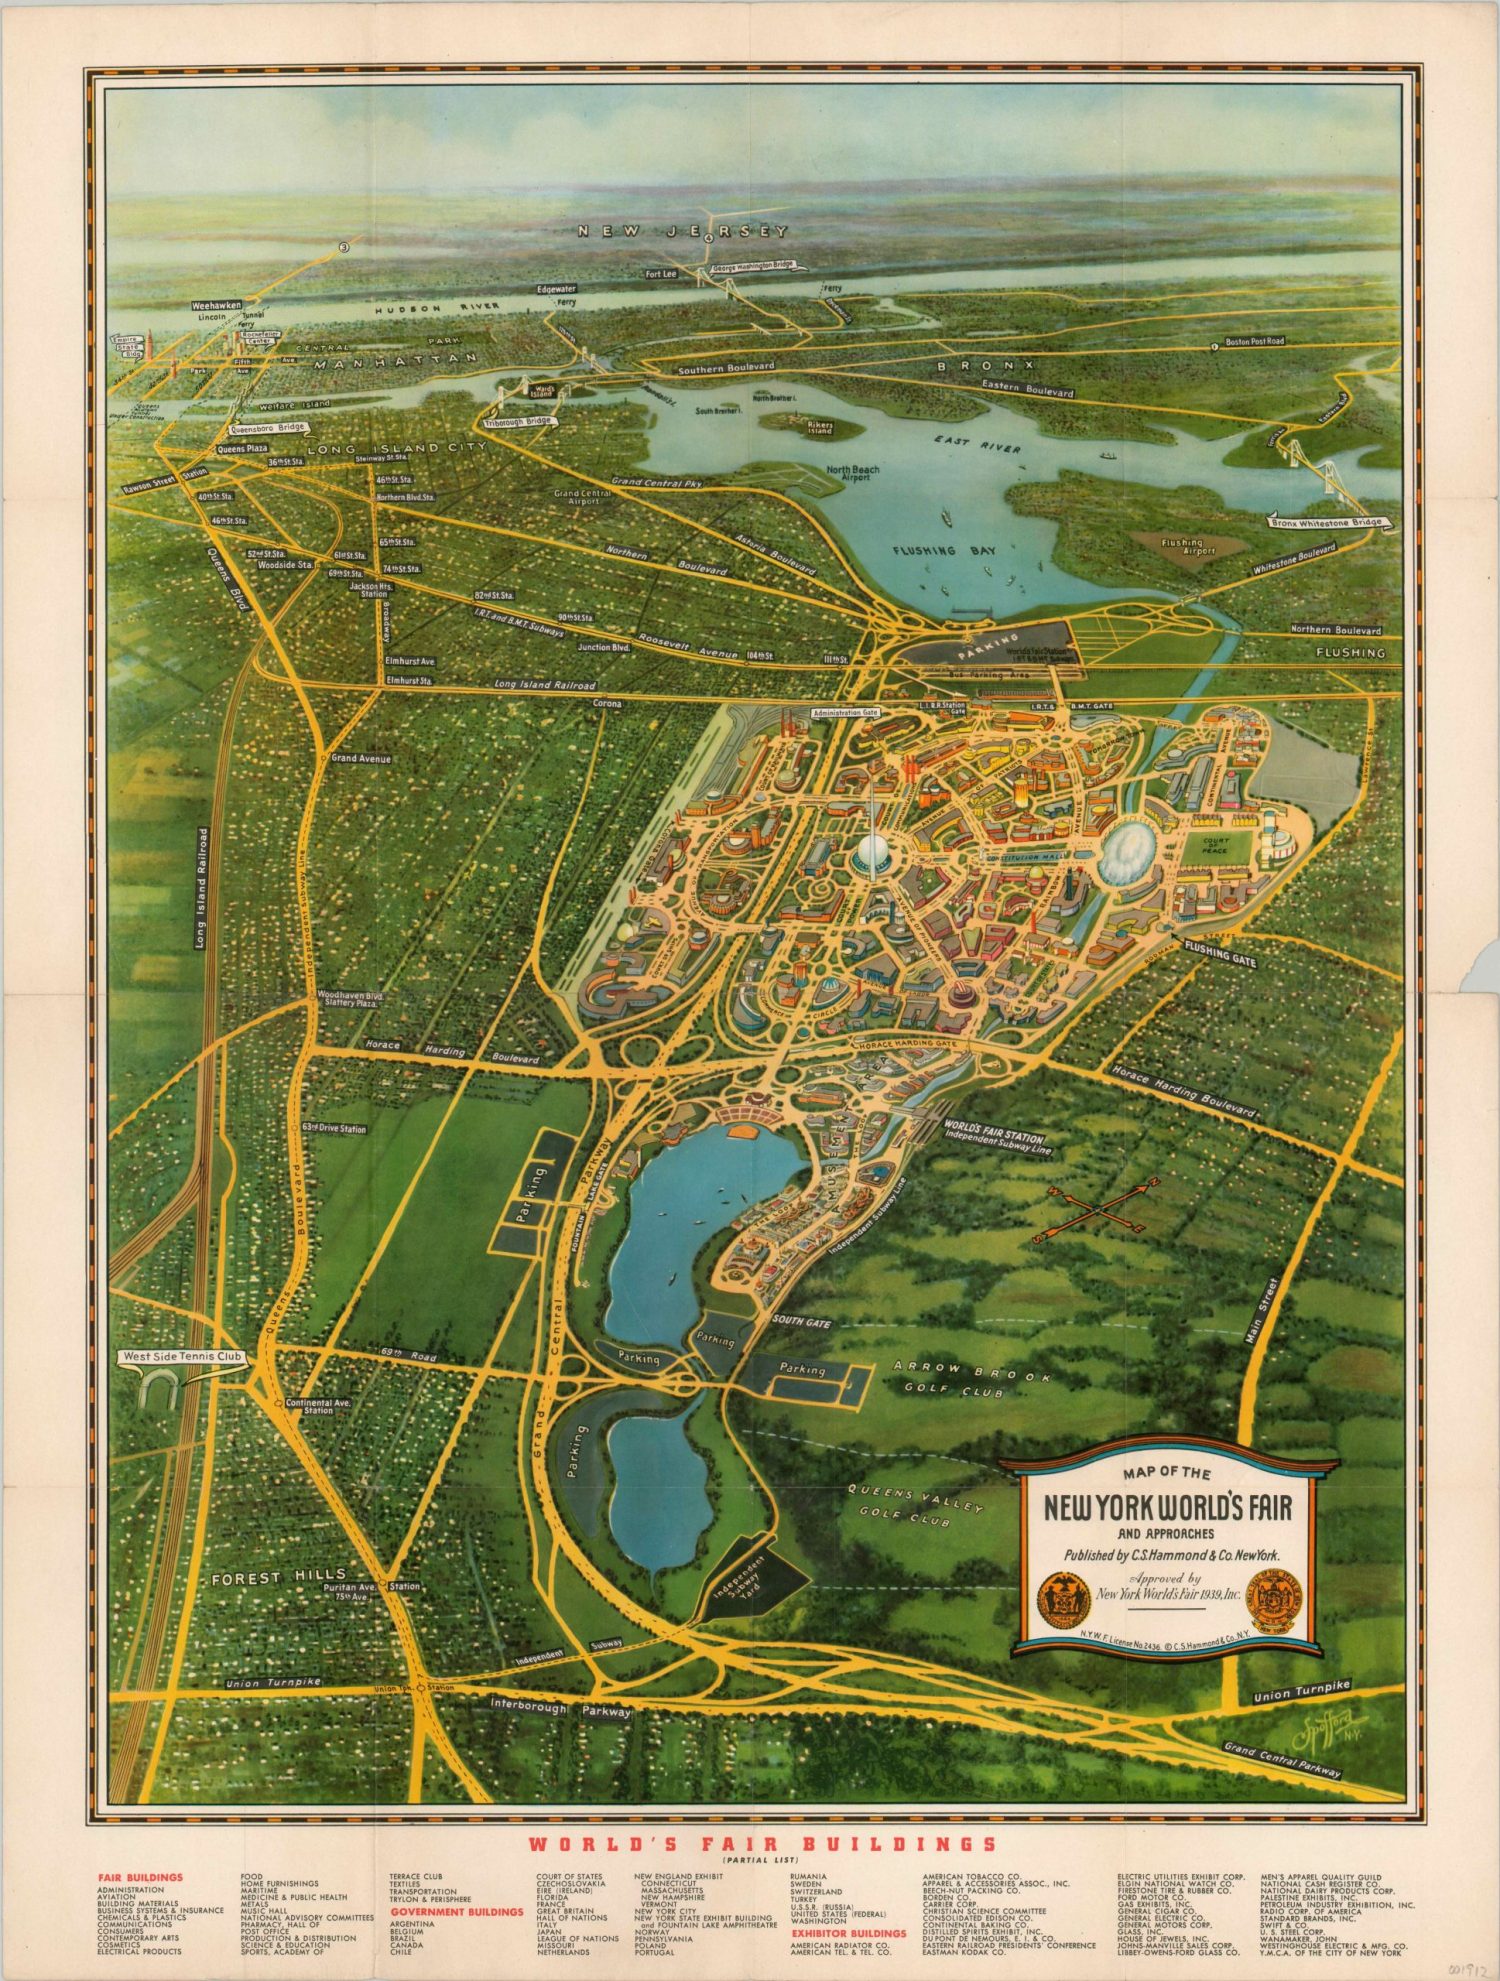 MAP OF THE NEW YORK WORLDS FAIR AND APPROACHES